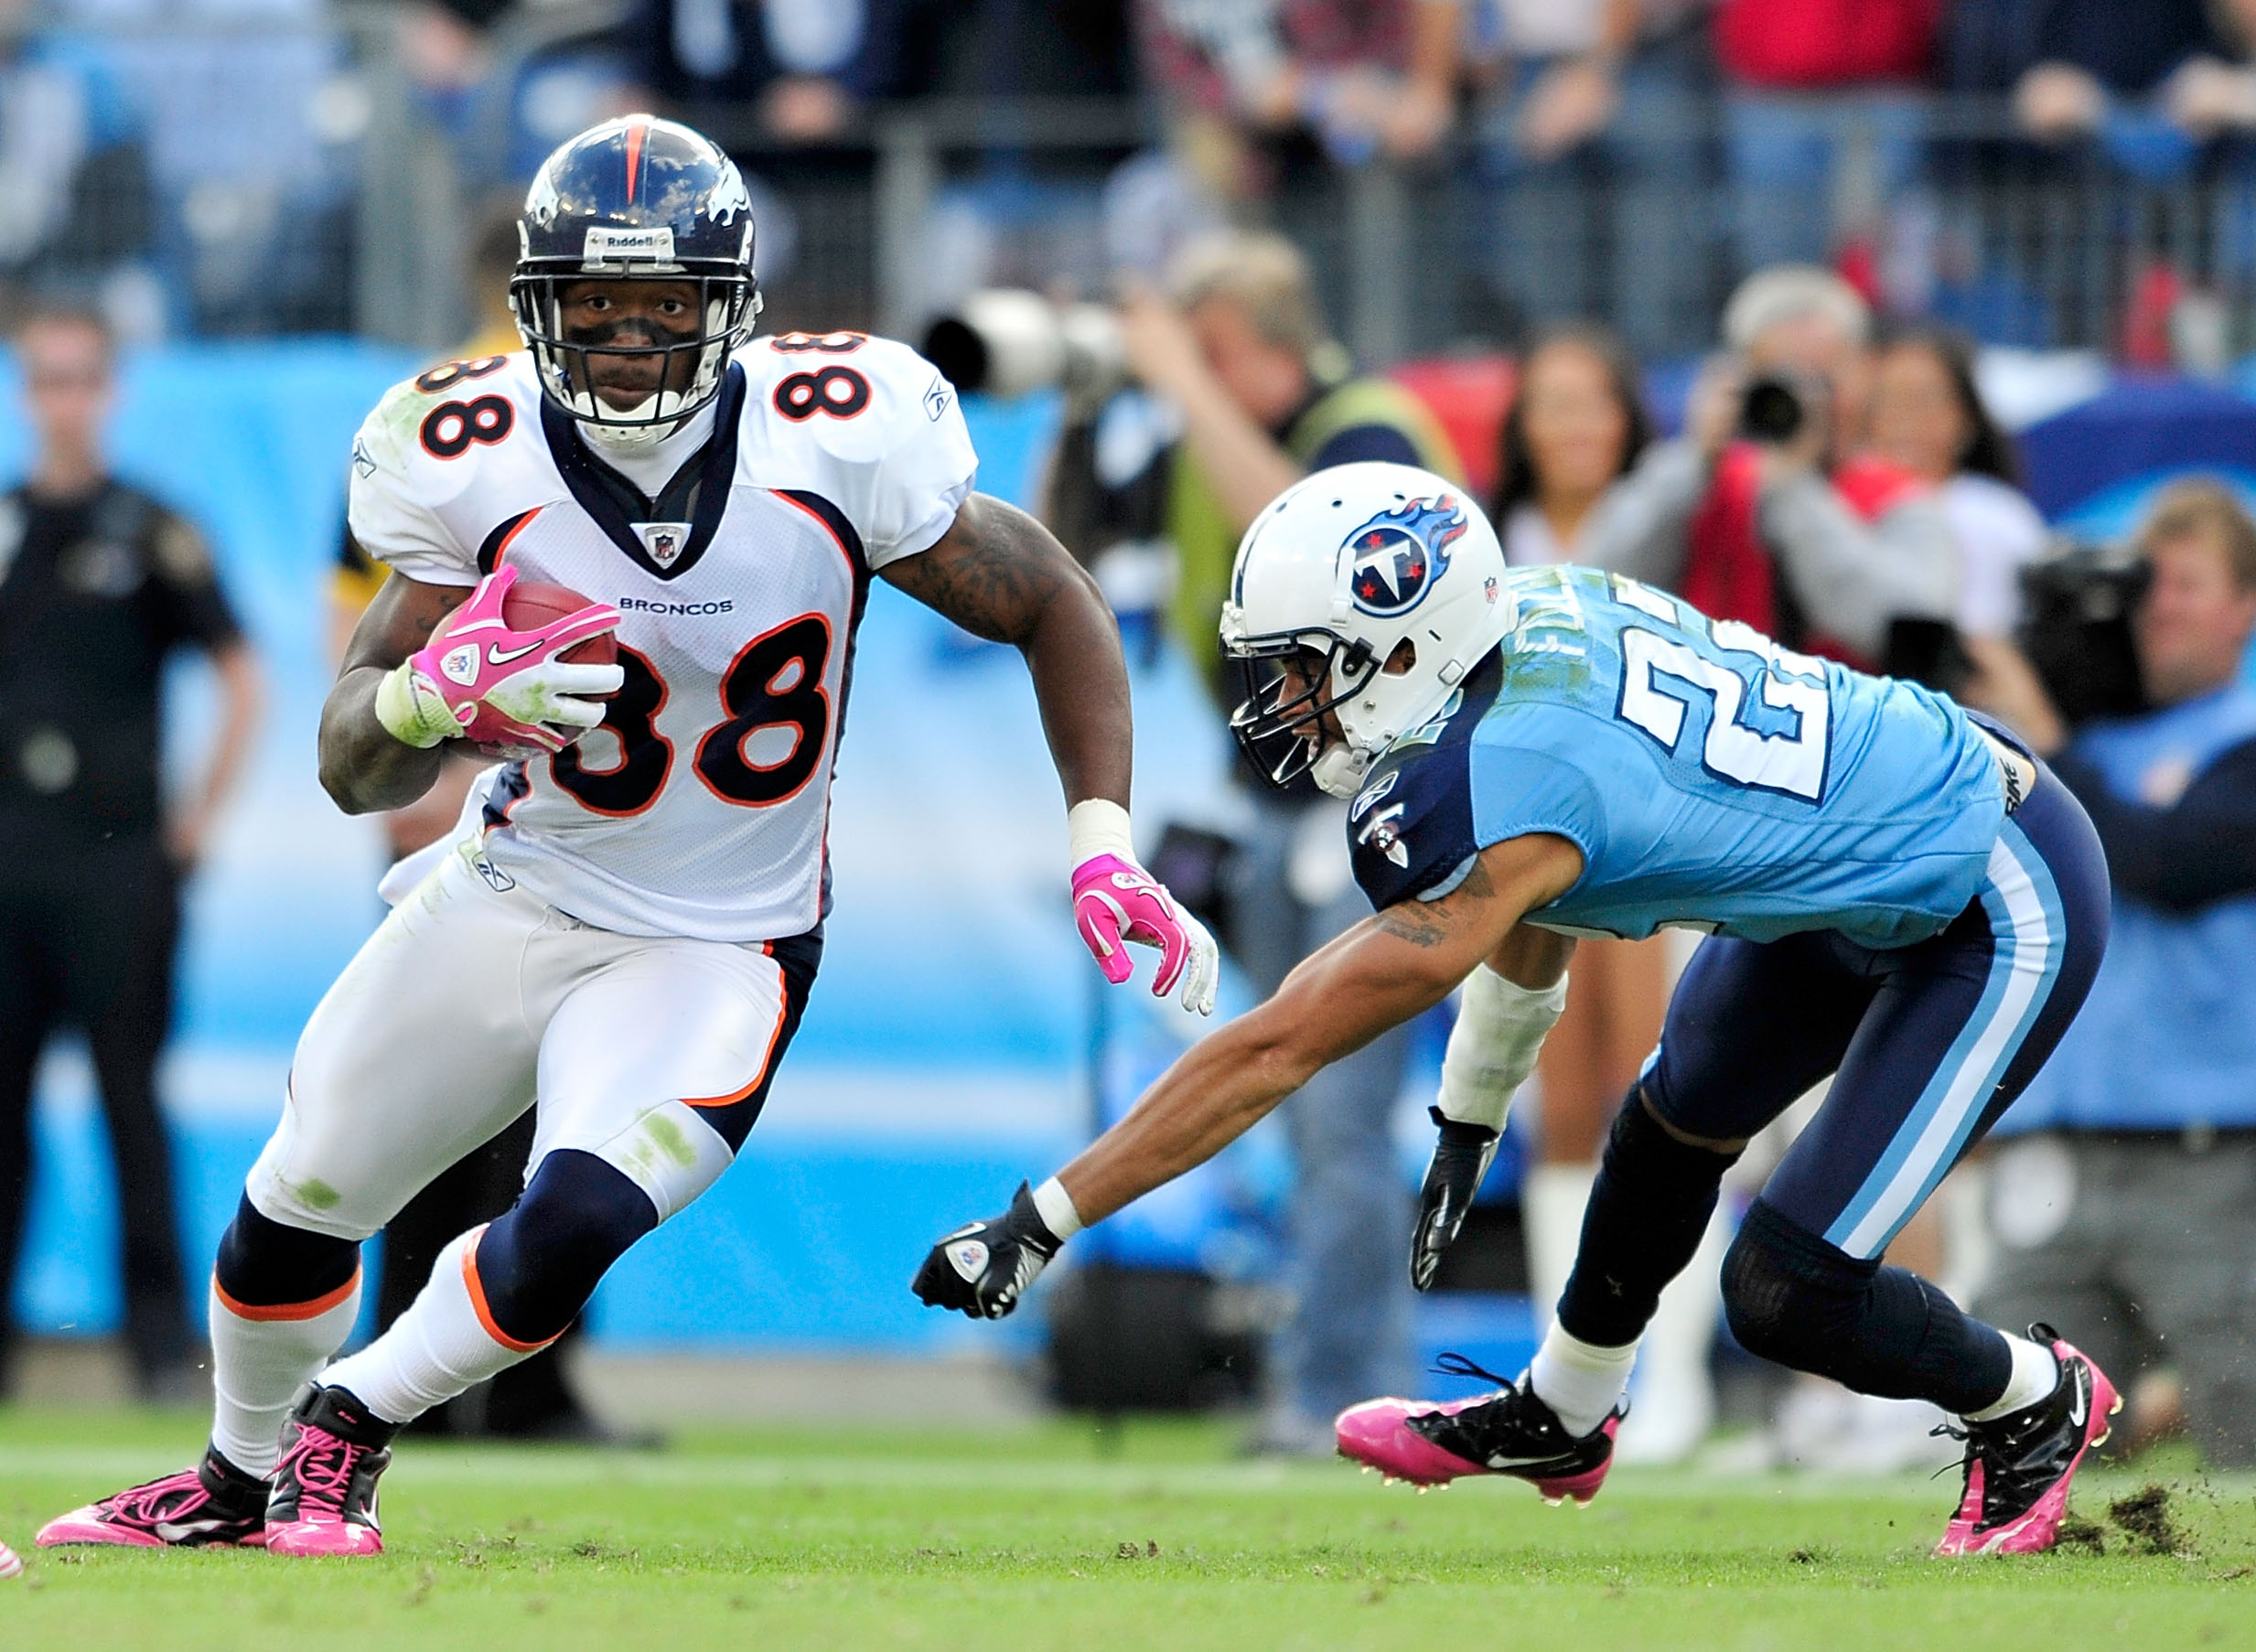 NASHVILLE, TN - OCTOBER 03:  Demaryius Thomas #88 of the Denver Broncos breaks away from Vincent Fuller #22 of the Tennessee Titans  at LP Field on October 3, 2010 in Nashville, Tennessee. Denver won 26-20.  (Photo by Grant Halverson/Getty Images)